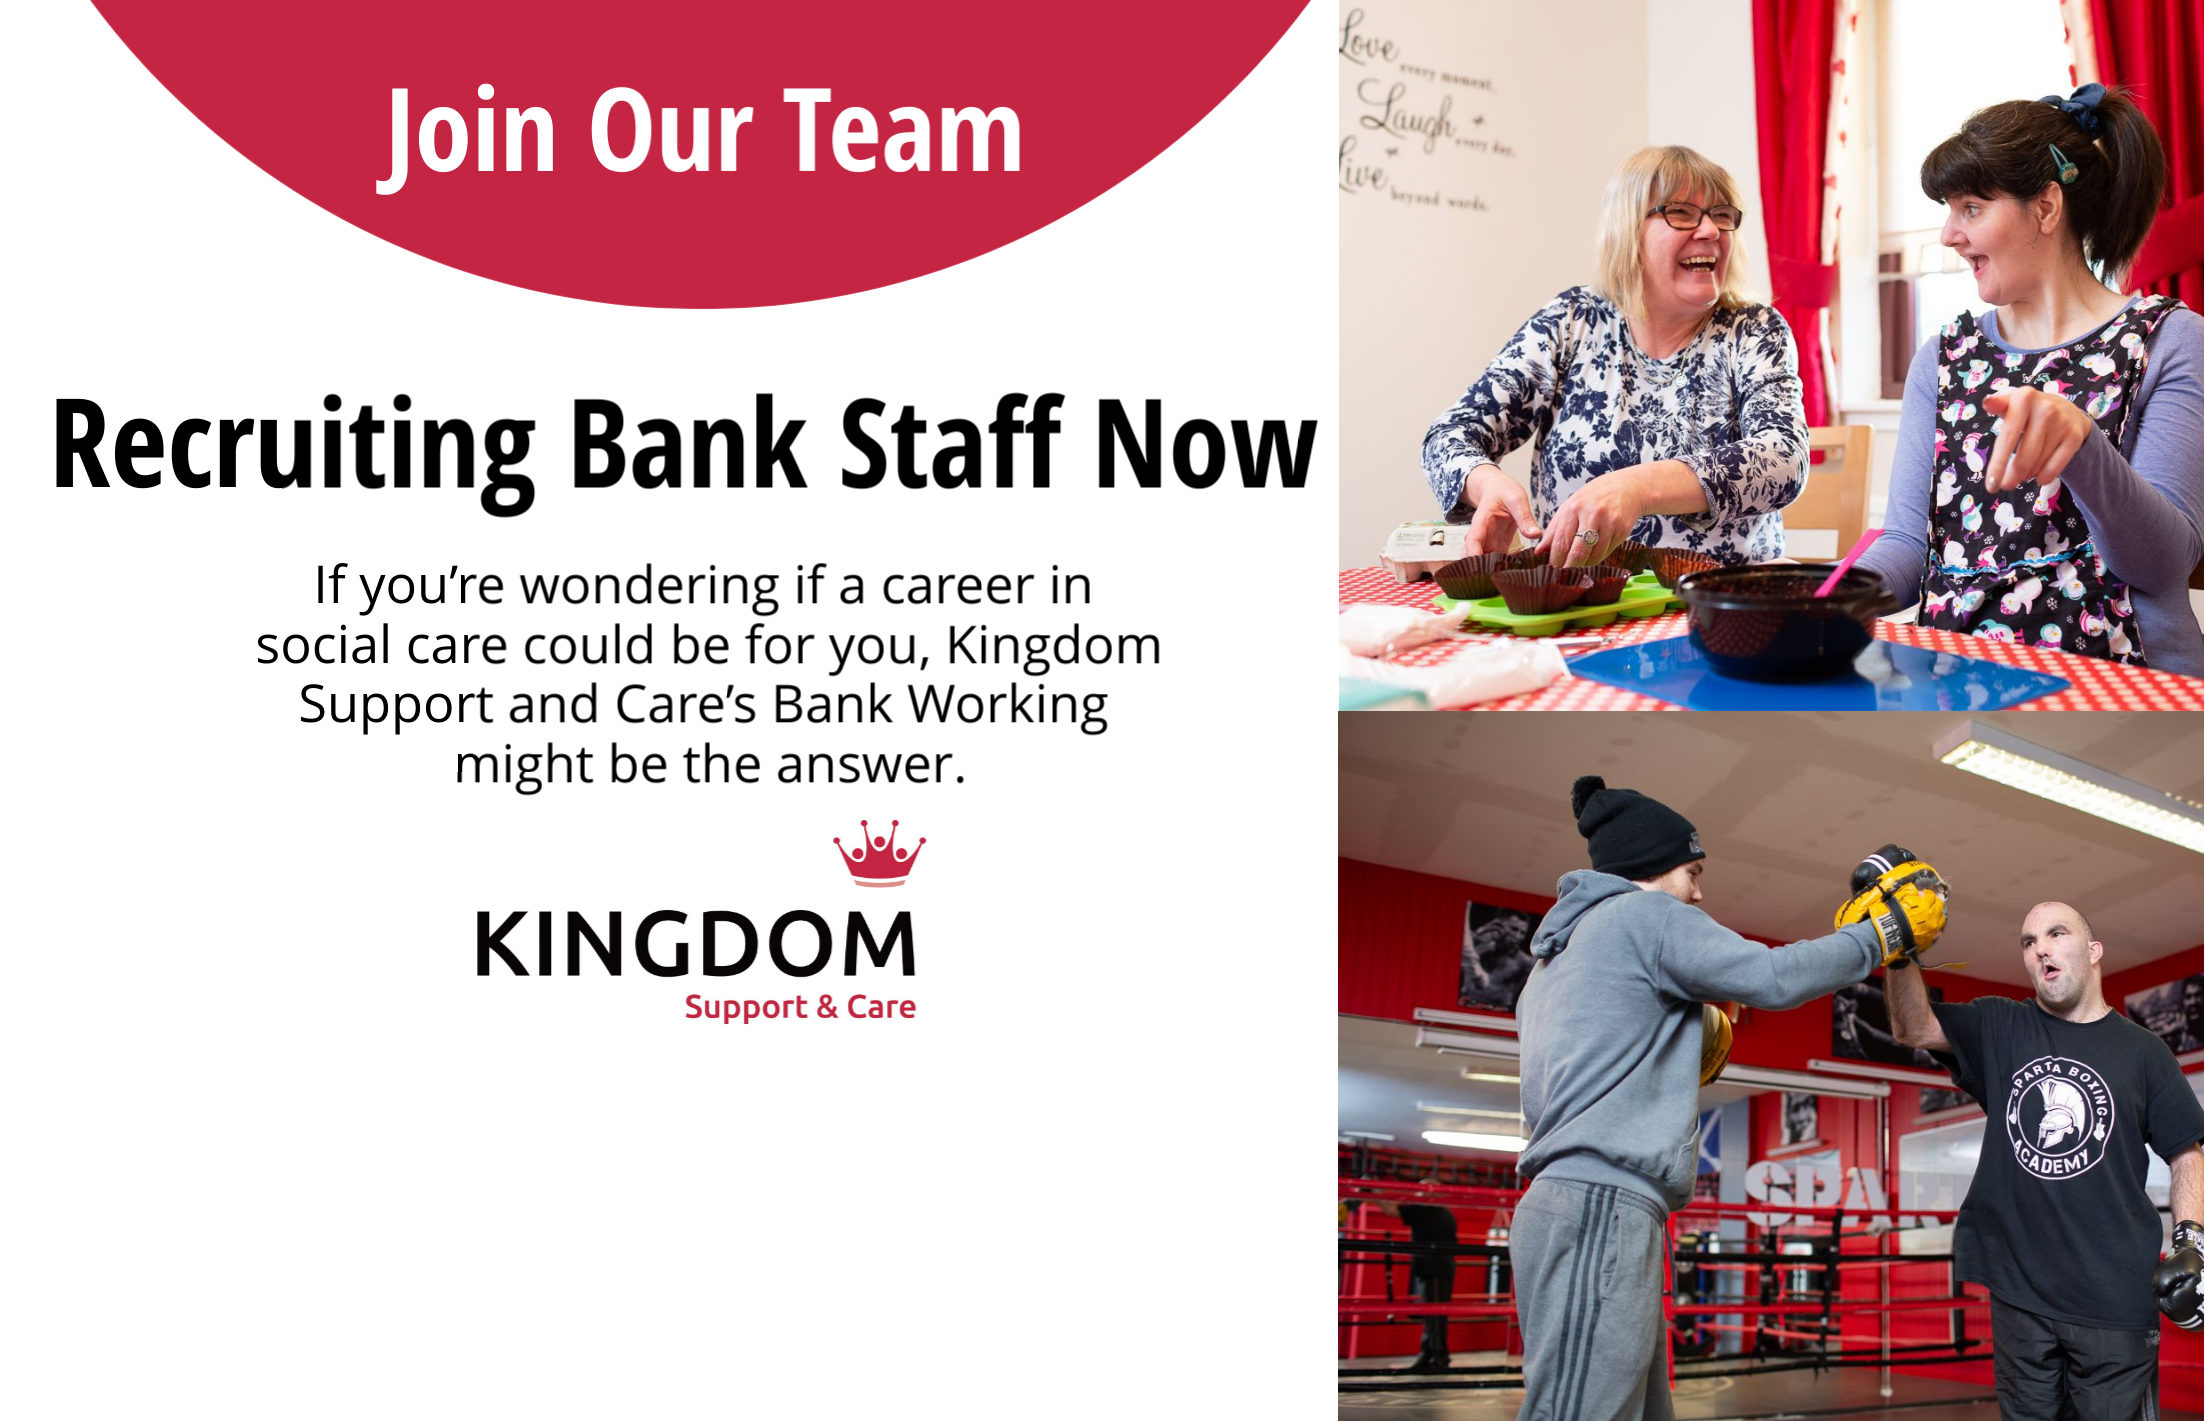 Kingdom Support & Care Recruiting Bank Staff Now